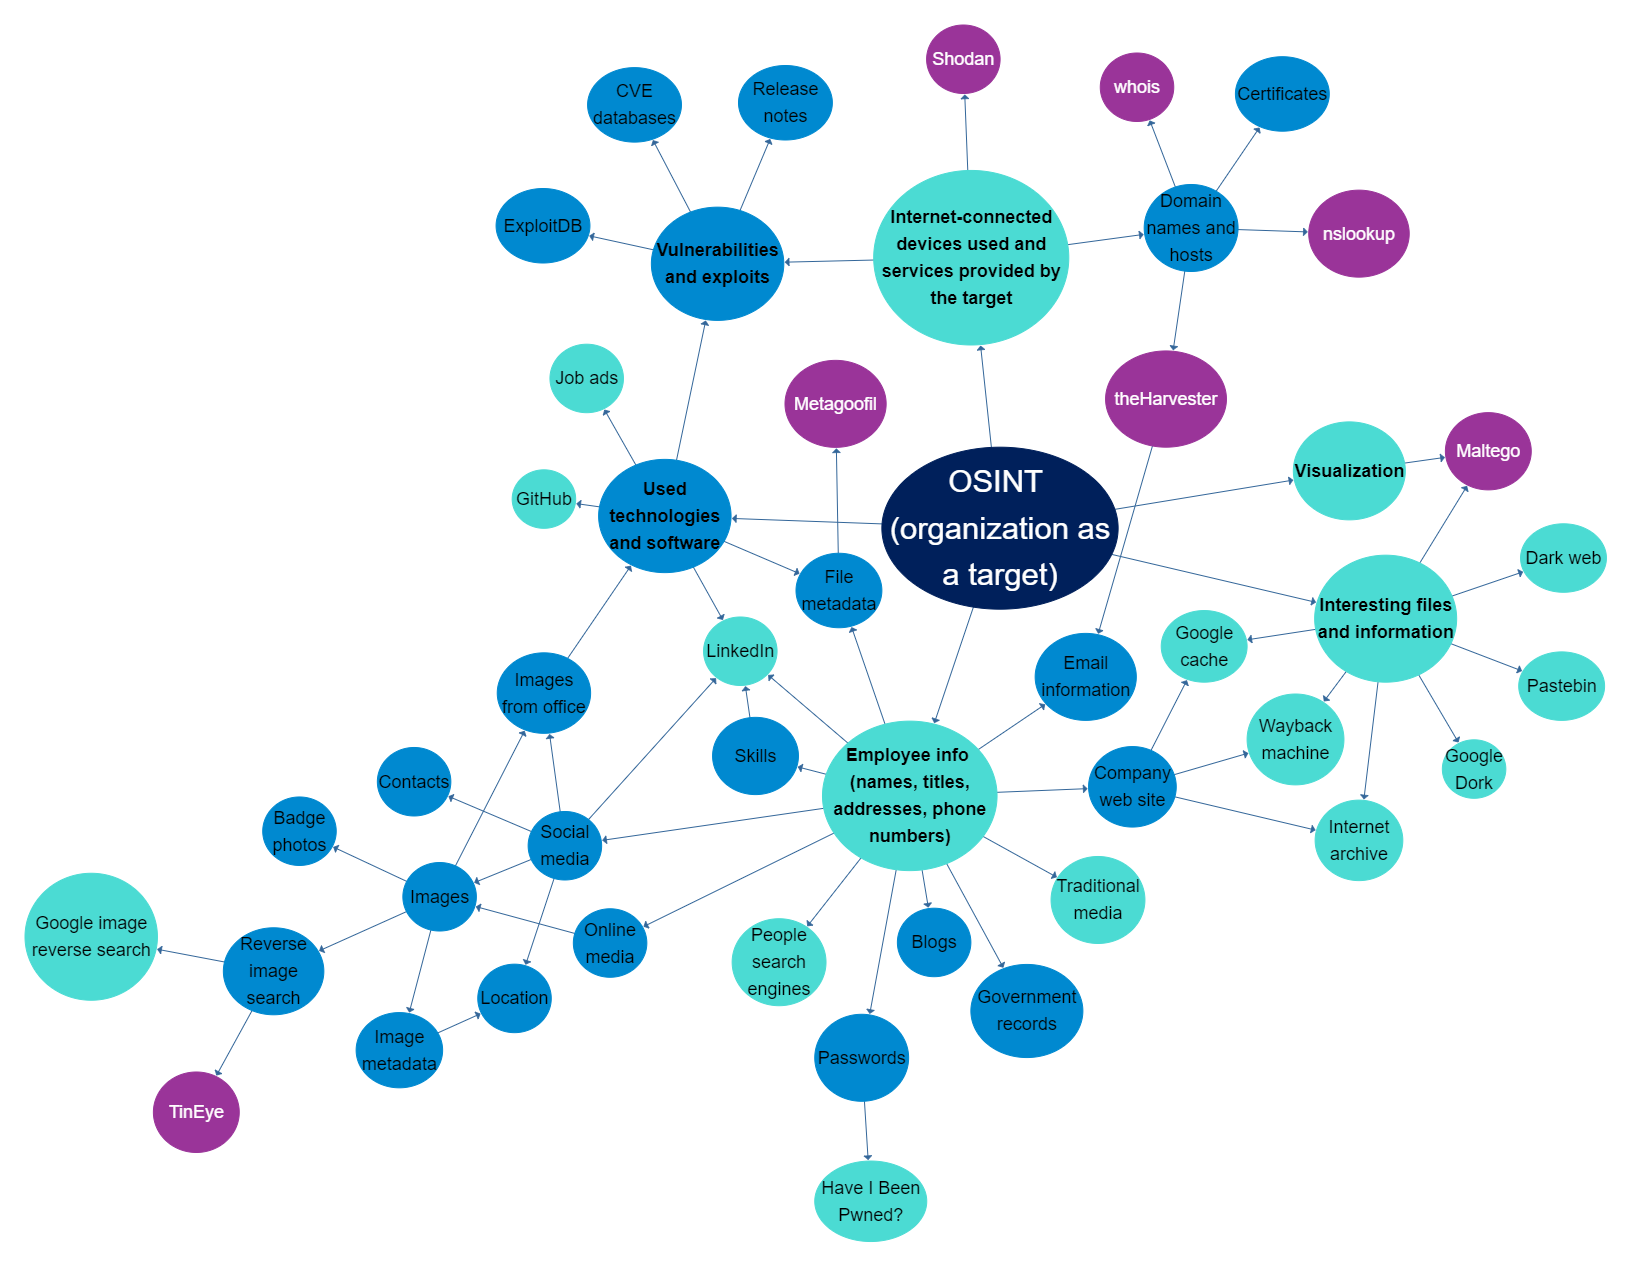 Mindmap about OSINT tools and information sources 